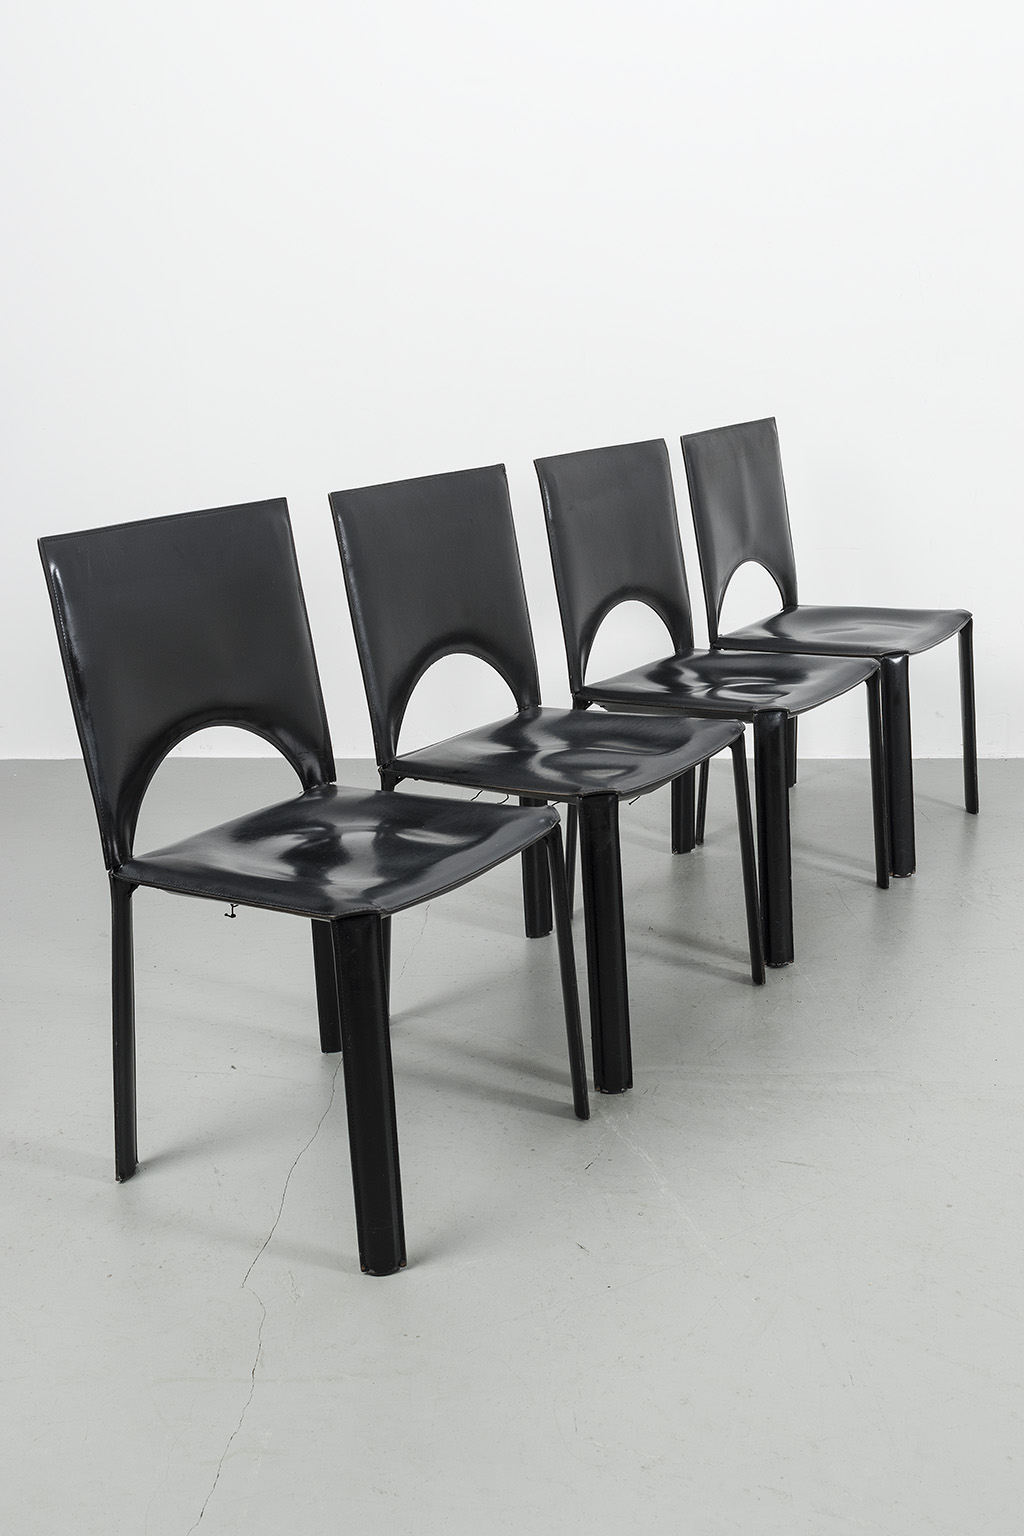 De Couro of Brazil chairs